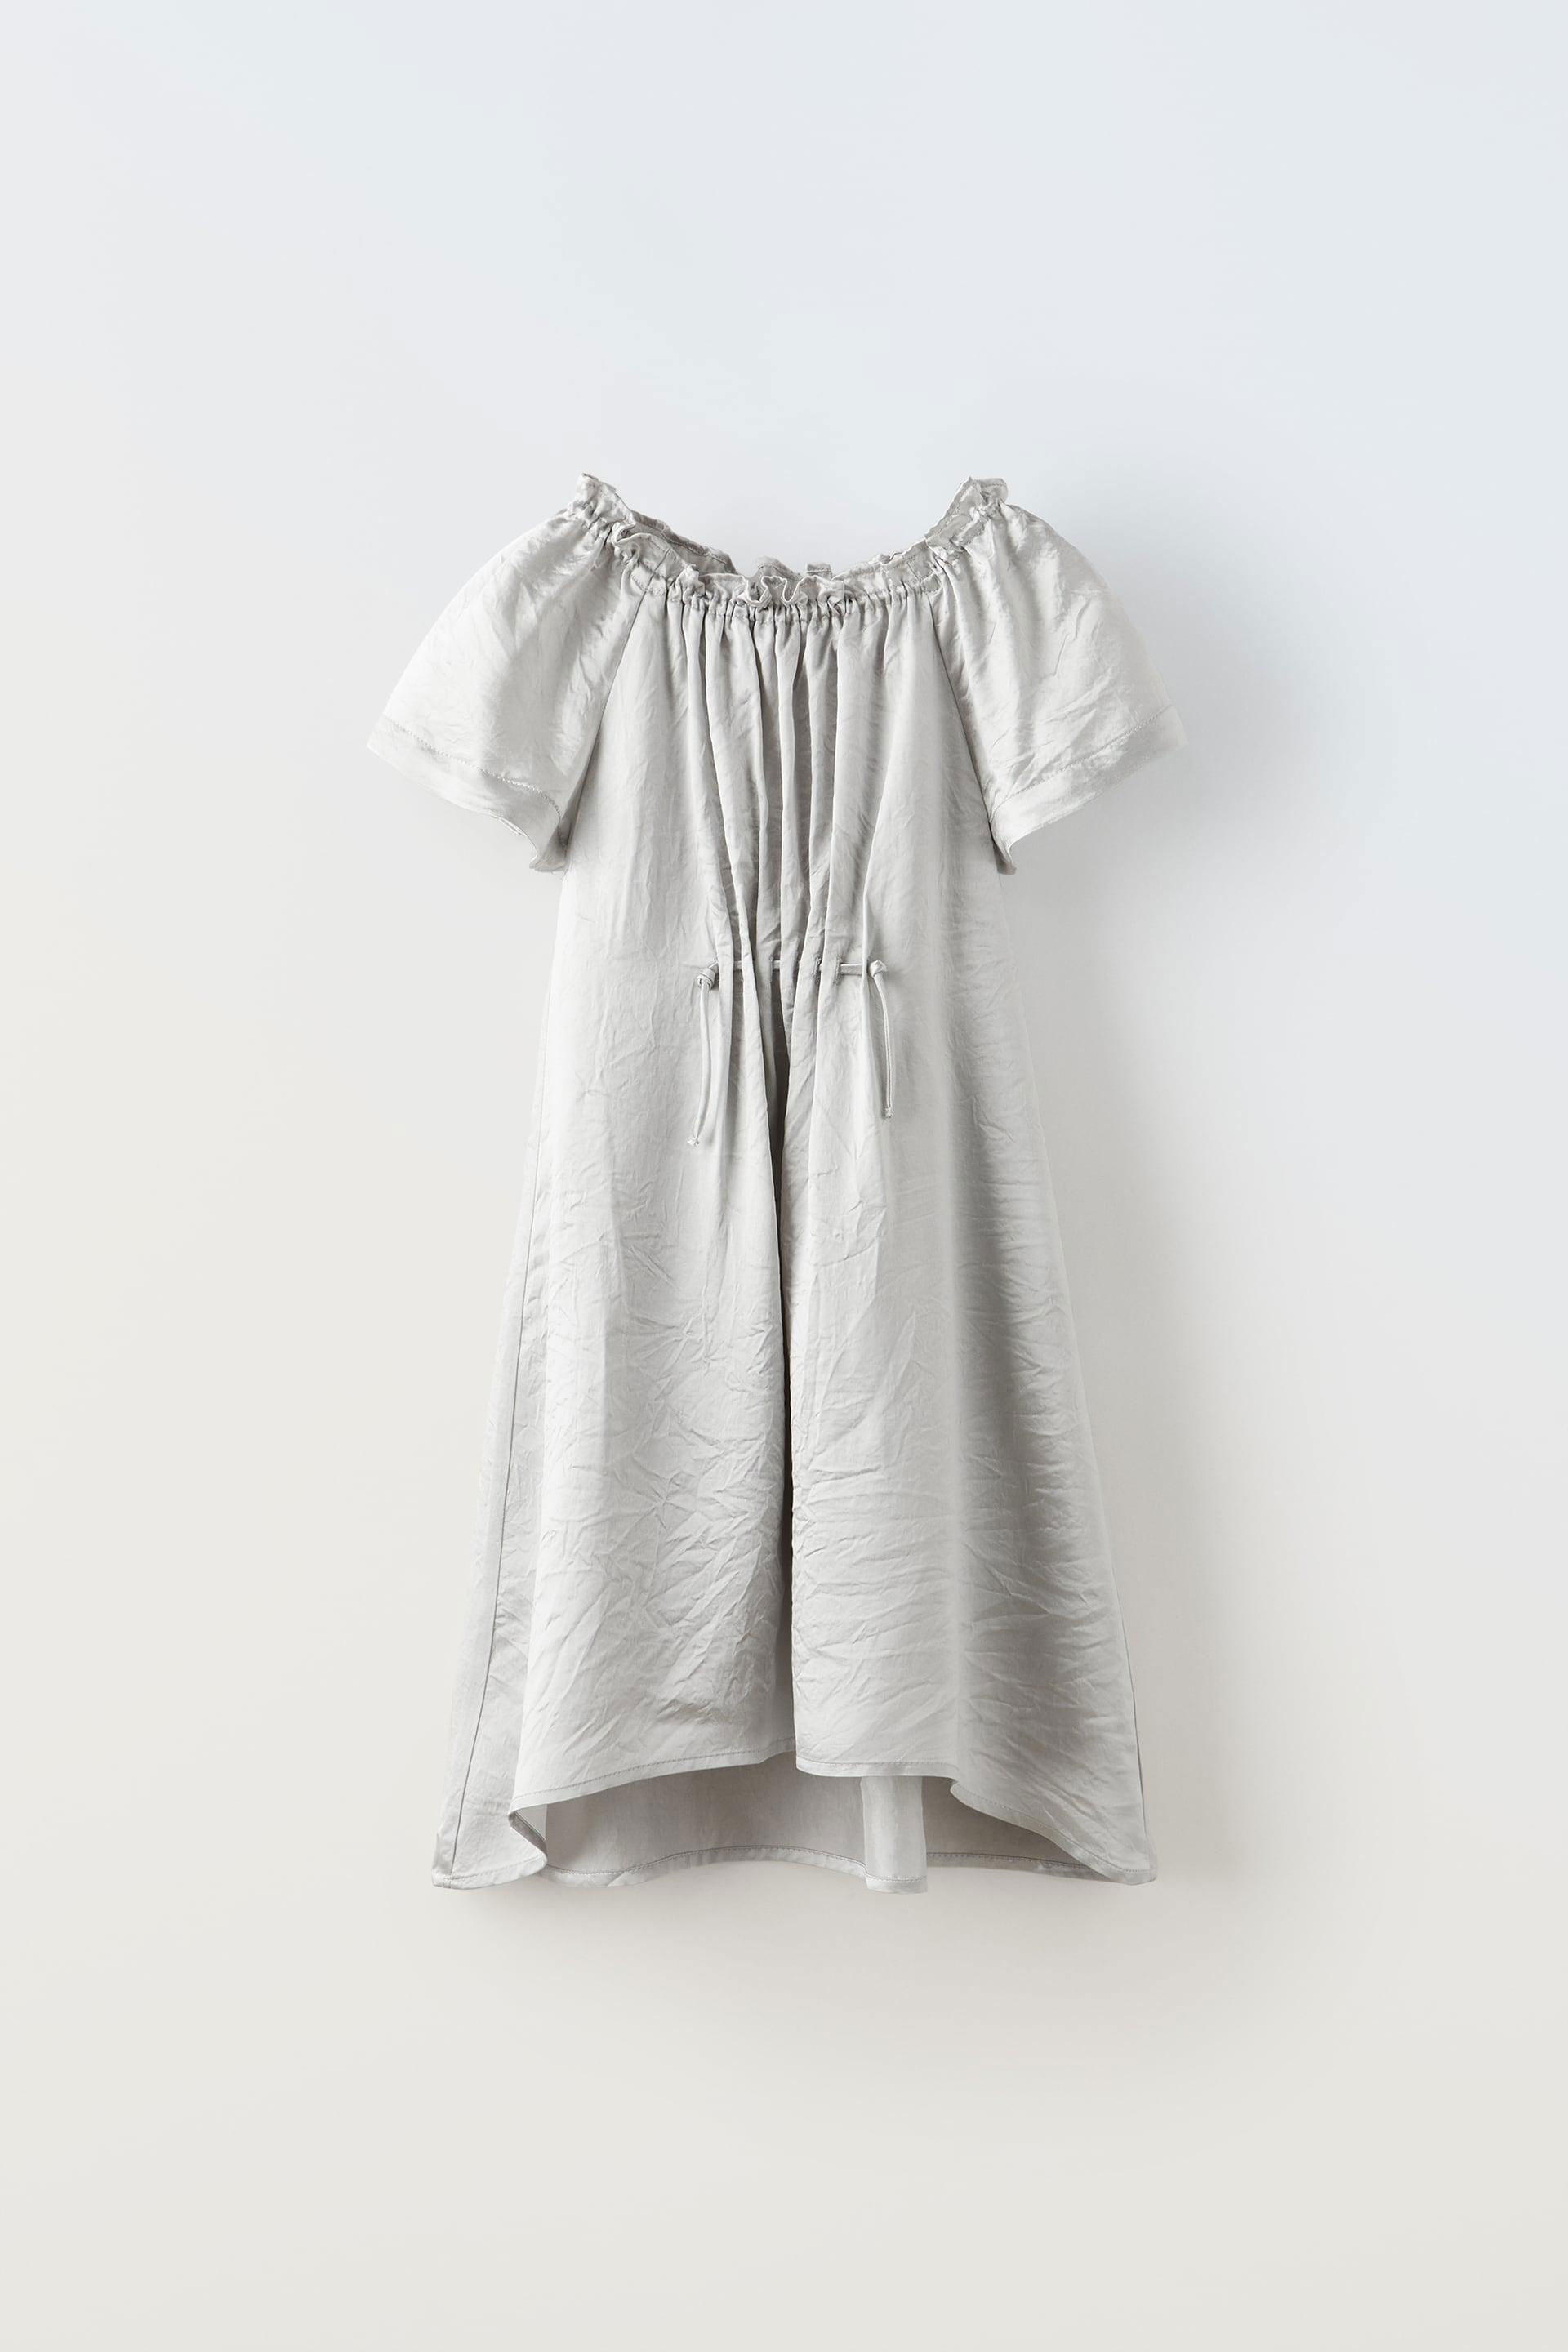 RUCHED SHIMMERY DRESS by ZARA